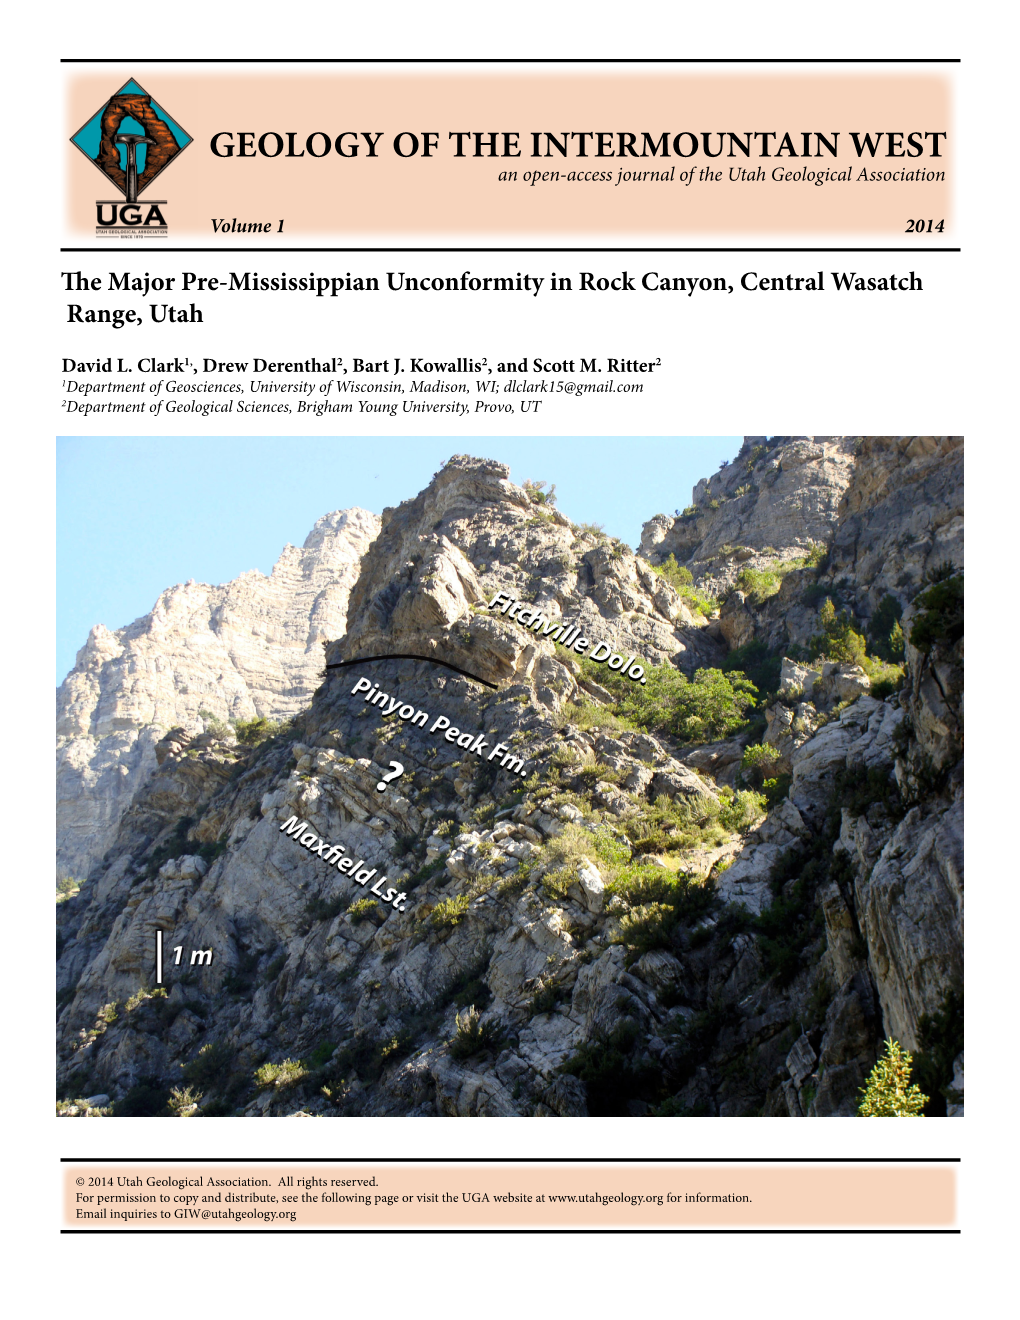 GEOLOGY of the INTERMOUNTAIN WEST an Open-Access Journal of the Utah Geological Association